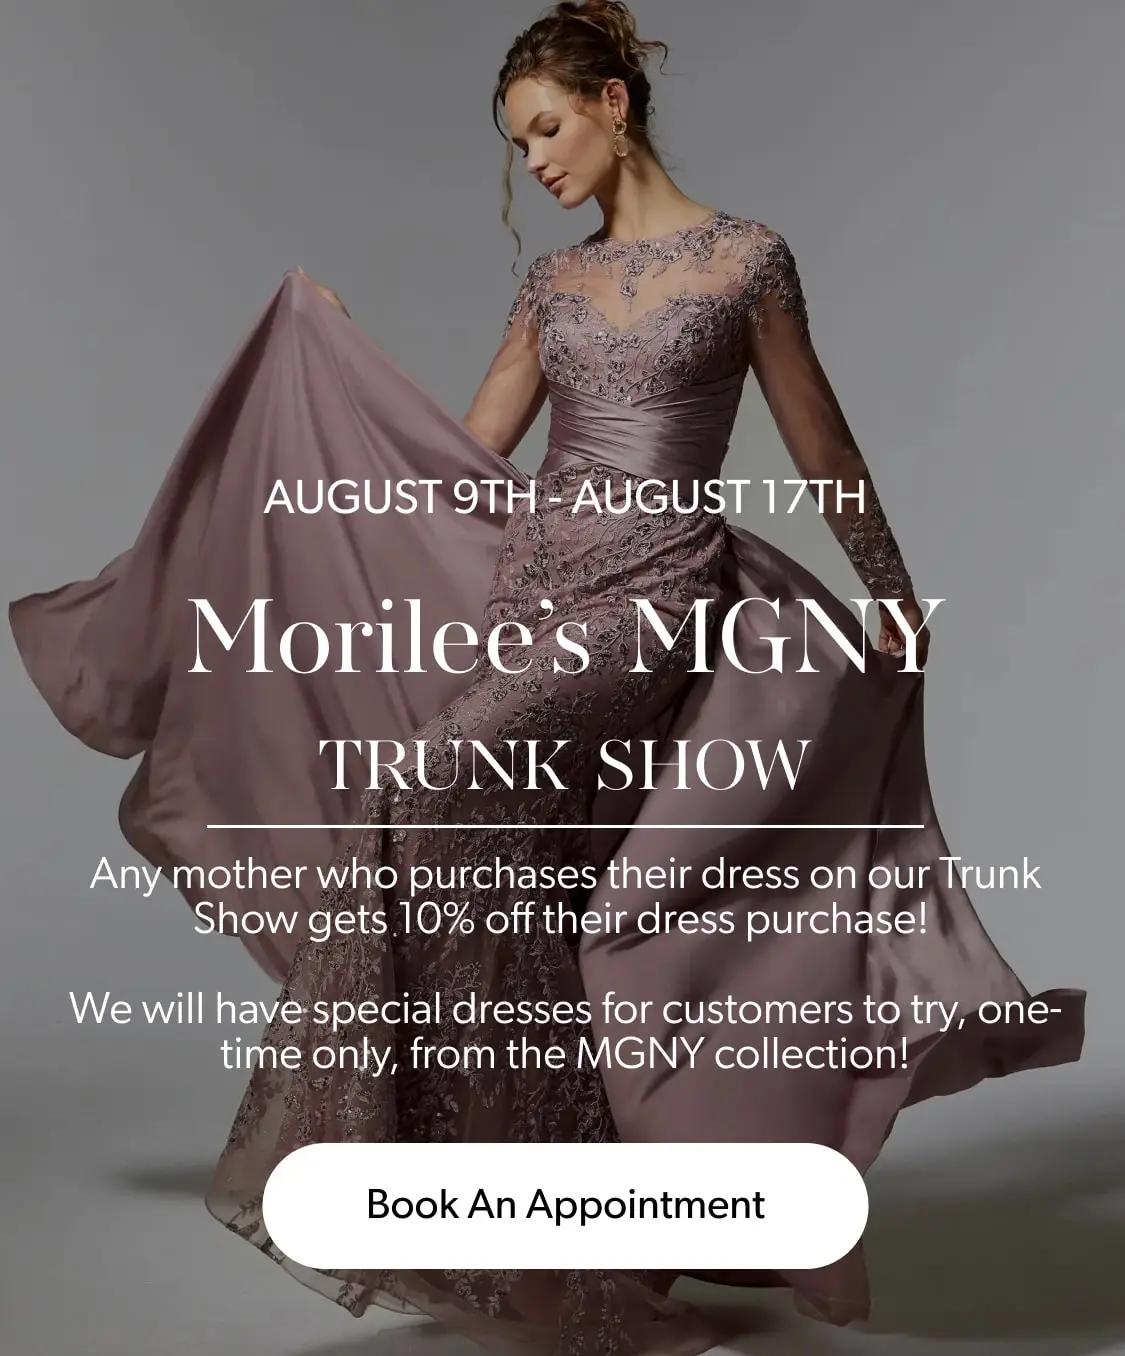 Mobile Morilee's MGNY Trunk Show Banner